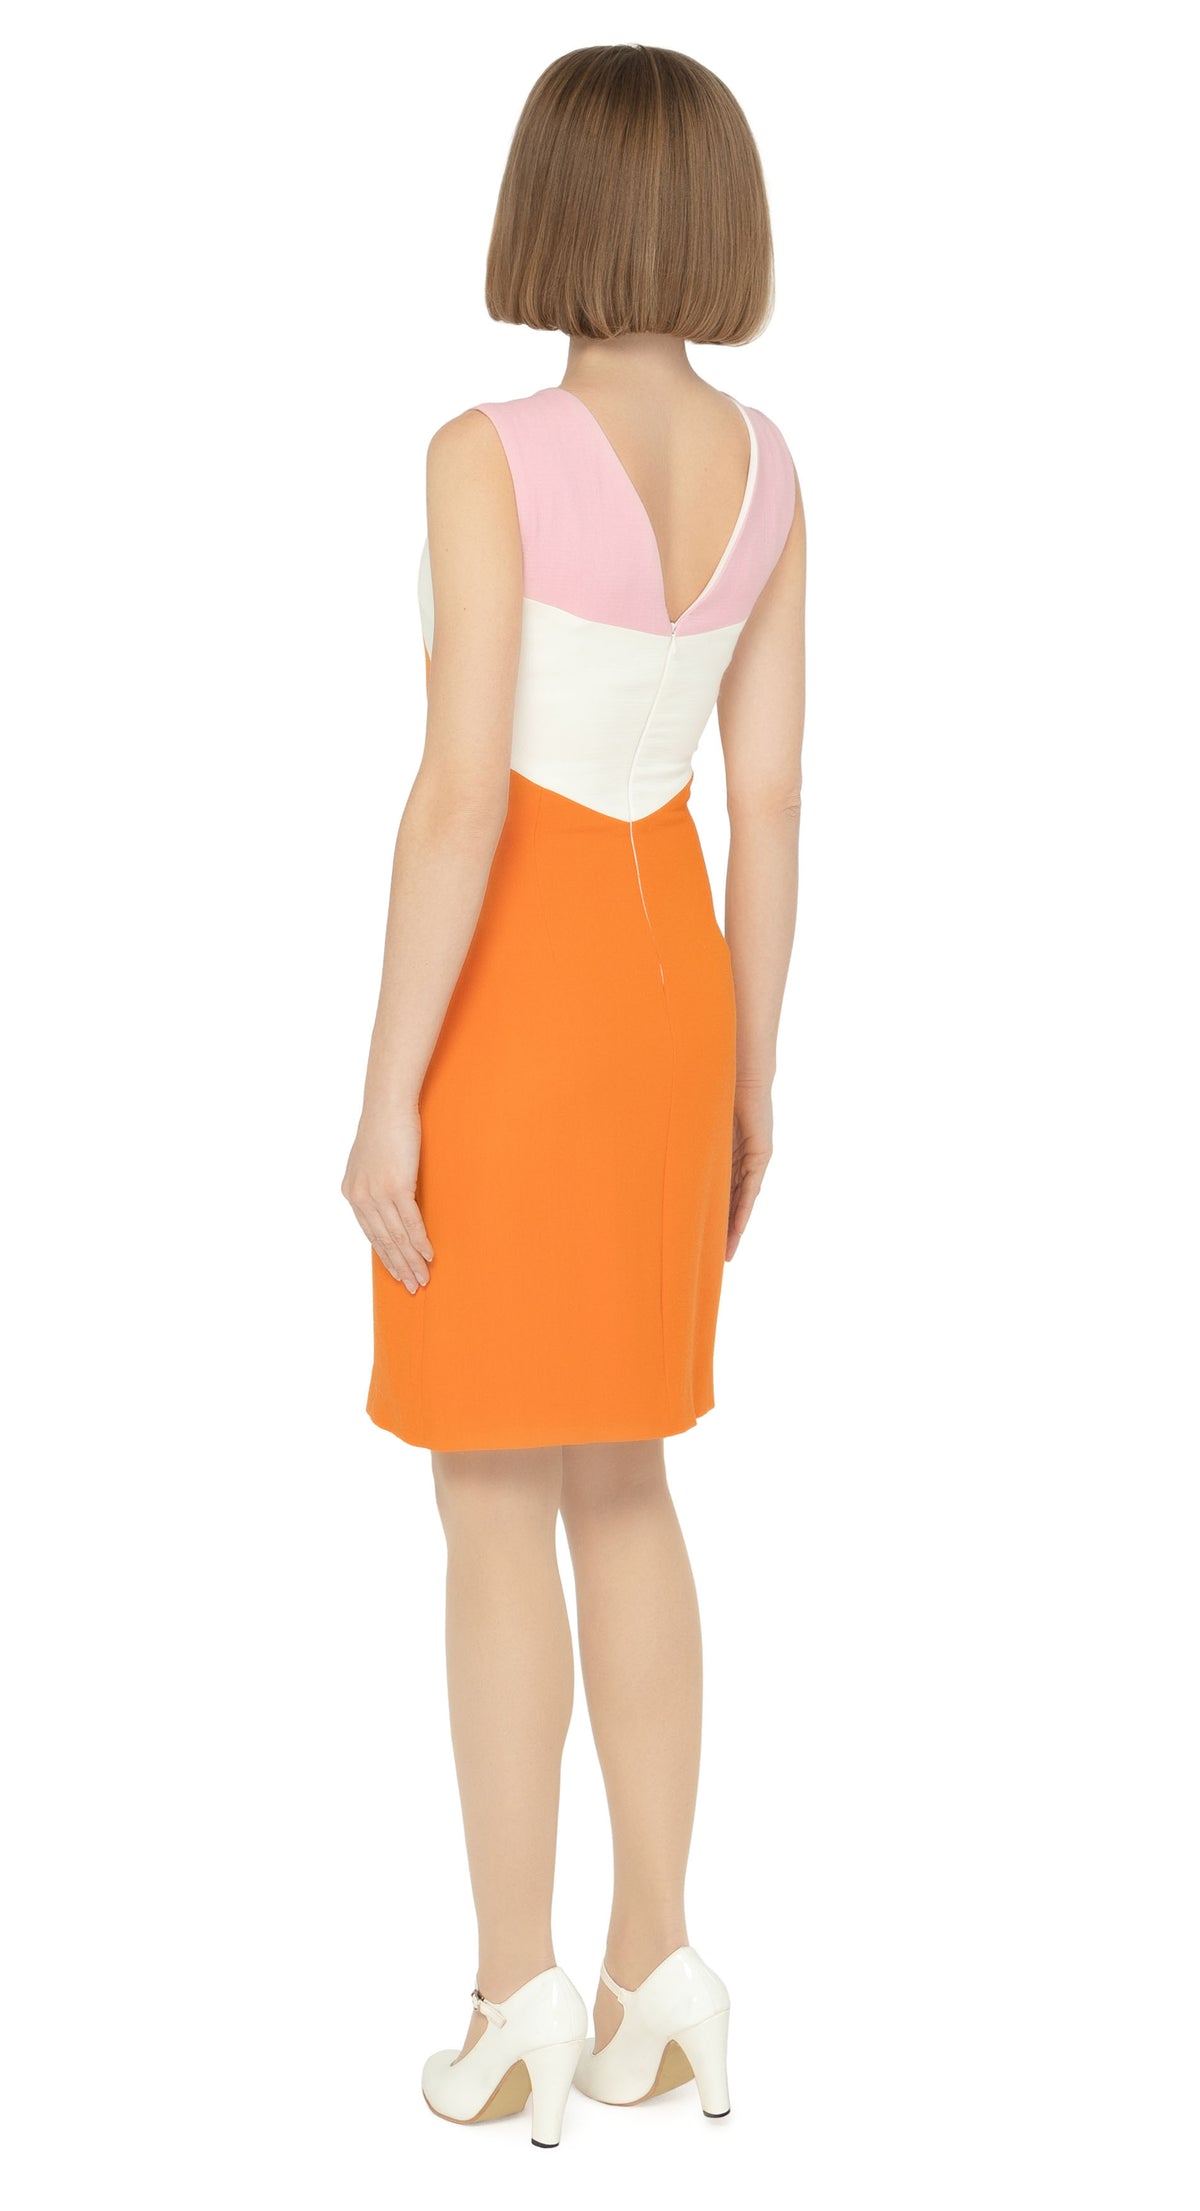 This gorgeous, sixties style dress is a perfect fit for springtime occasions. The fitted silhouette, sleeveless design, and structured pale pink shoulder panels lead to a white band and an orange body. The dress also features a feminine cutout with a dainty bow, and a v-neckline. Fully lined for comfort, this dress is sure to turn heads with its choice of flattering feminine details and easy to pair to color scheme.